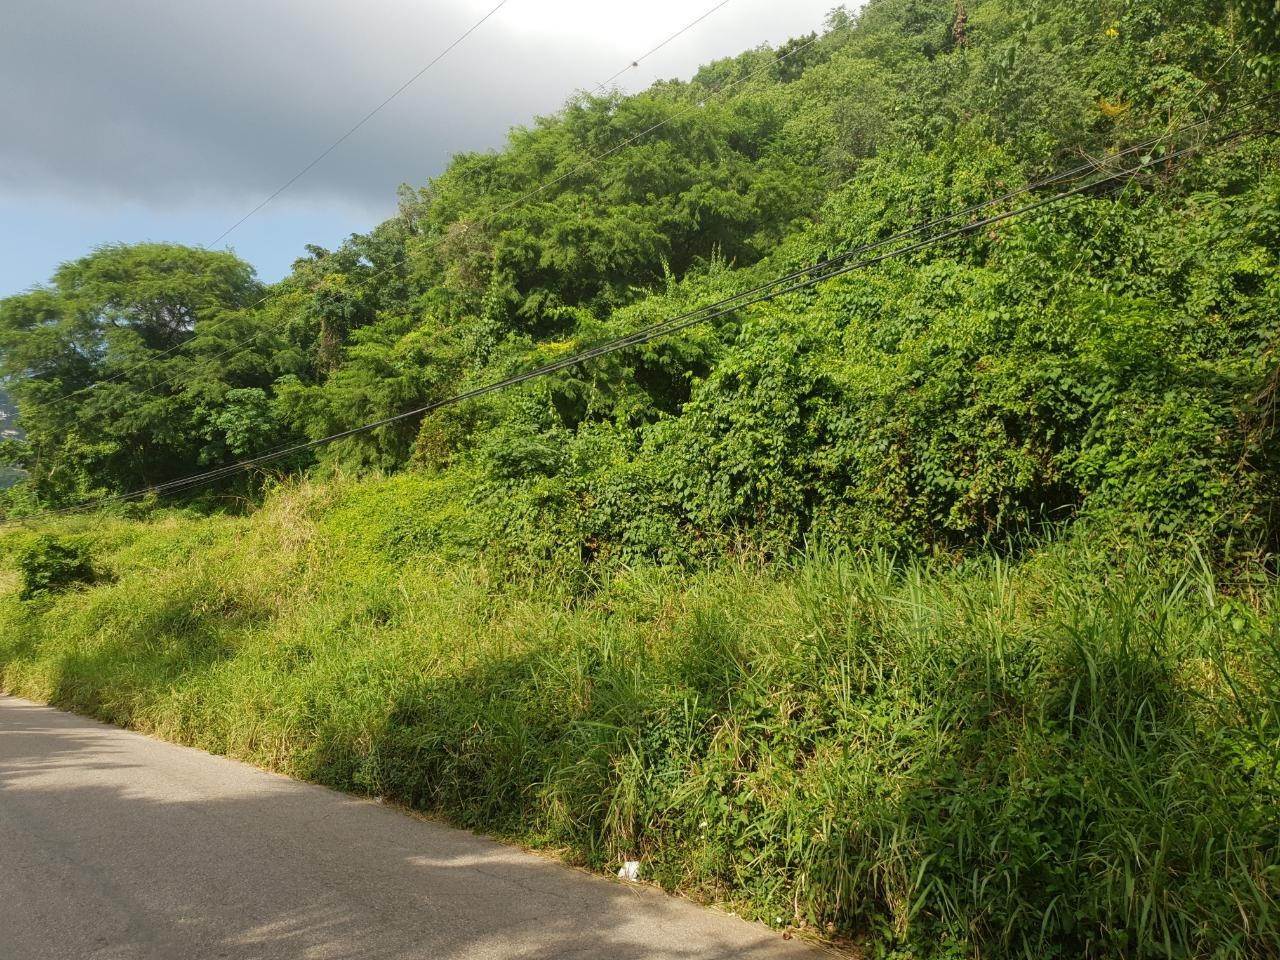 7. Lots / Acreage for Sale at Kingston 19, Kingston and Saint Andrew, Jamaica